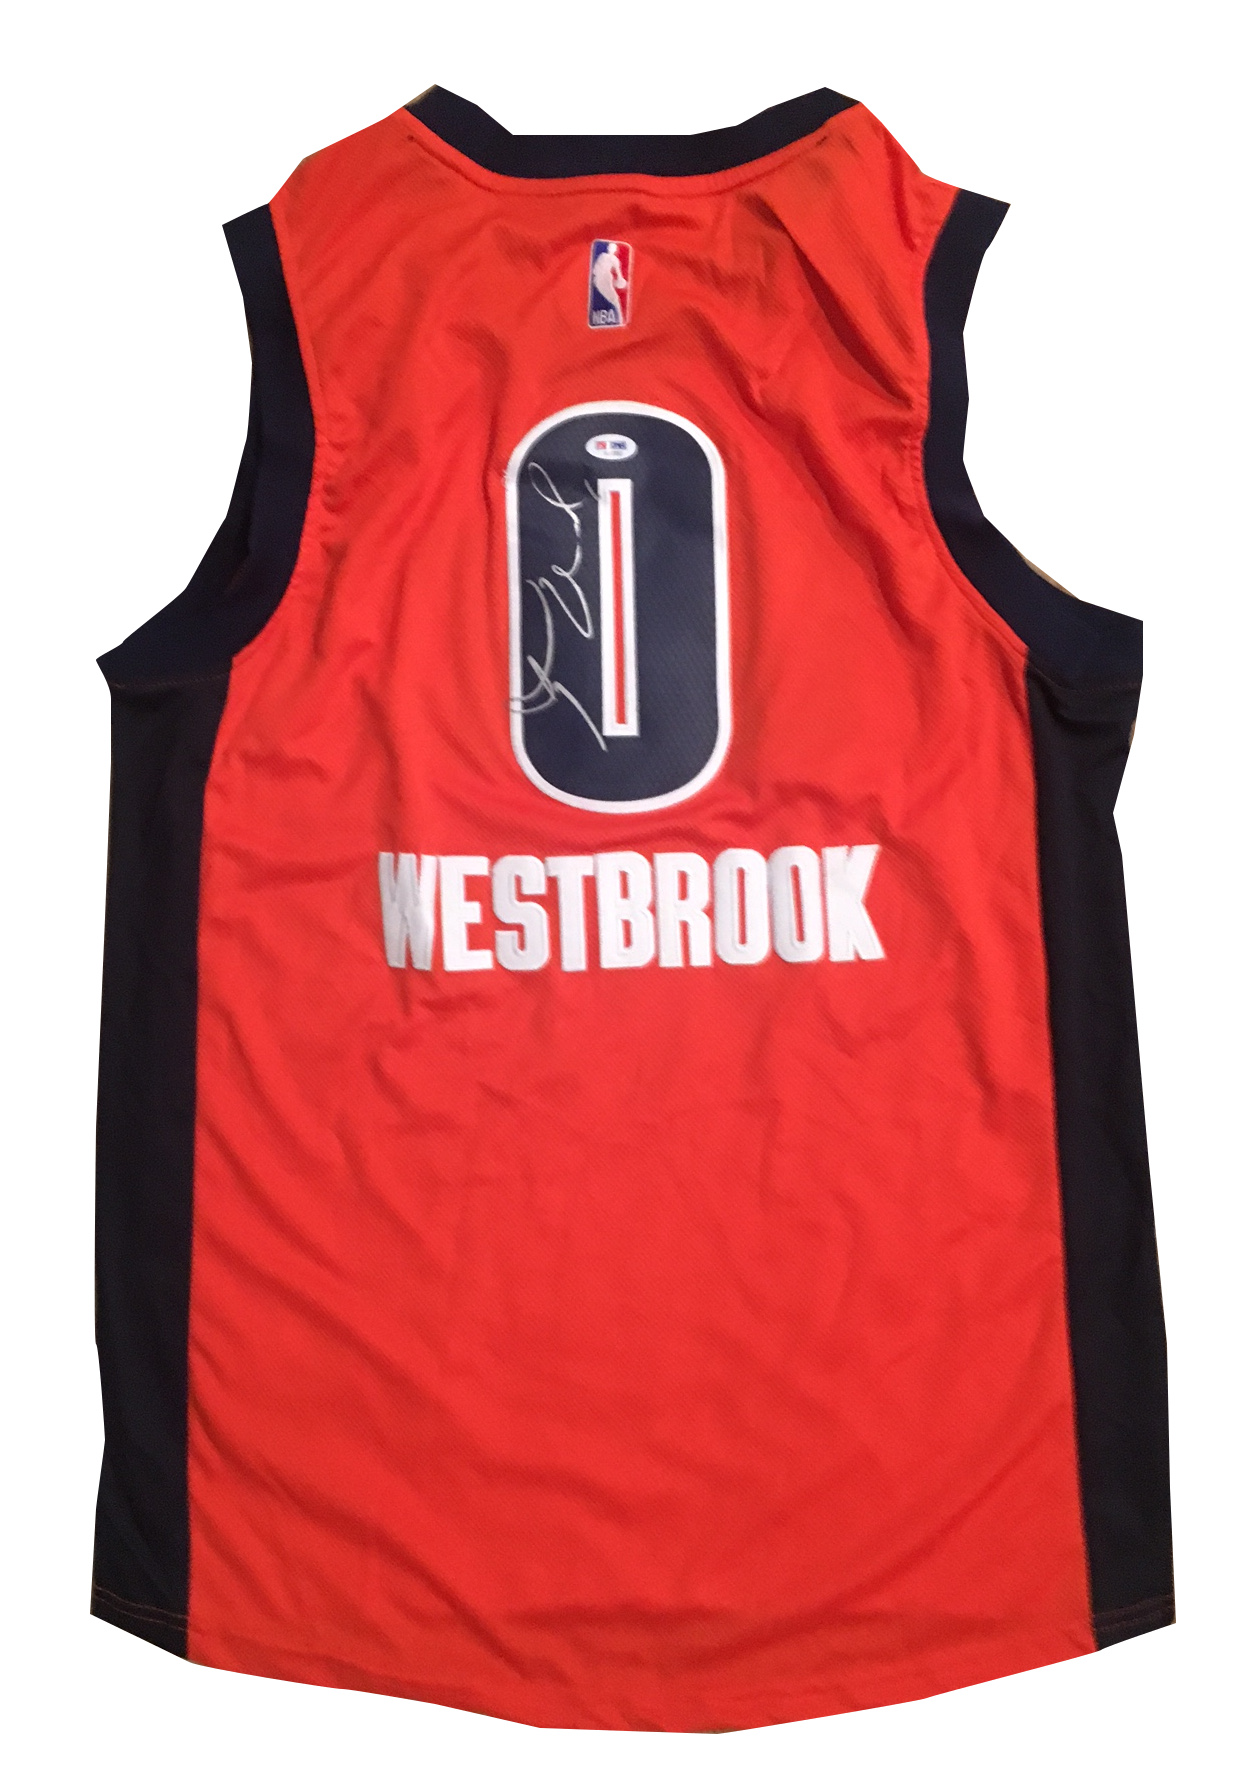 signed westbrook jersey